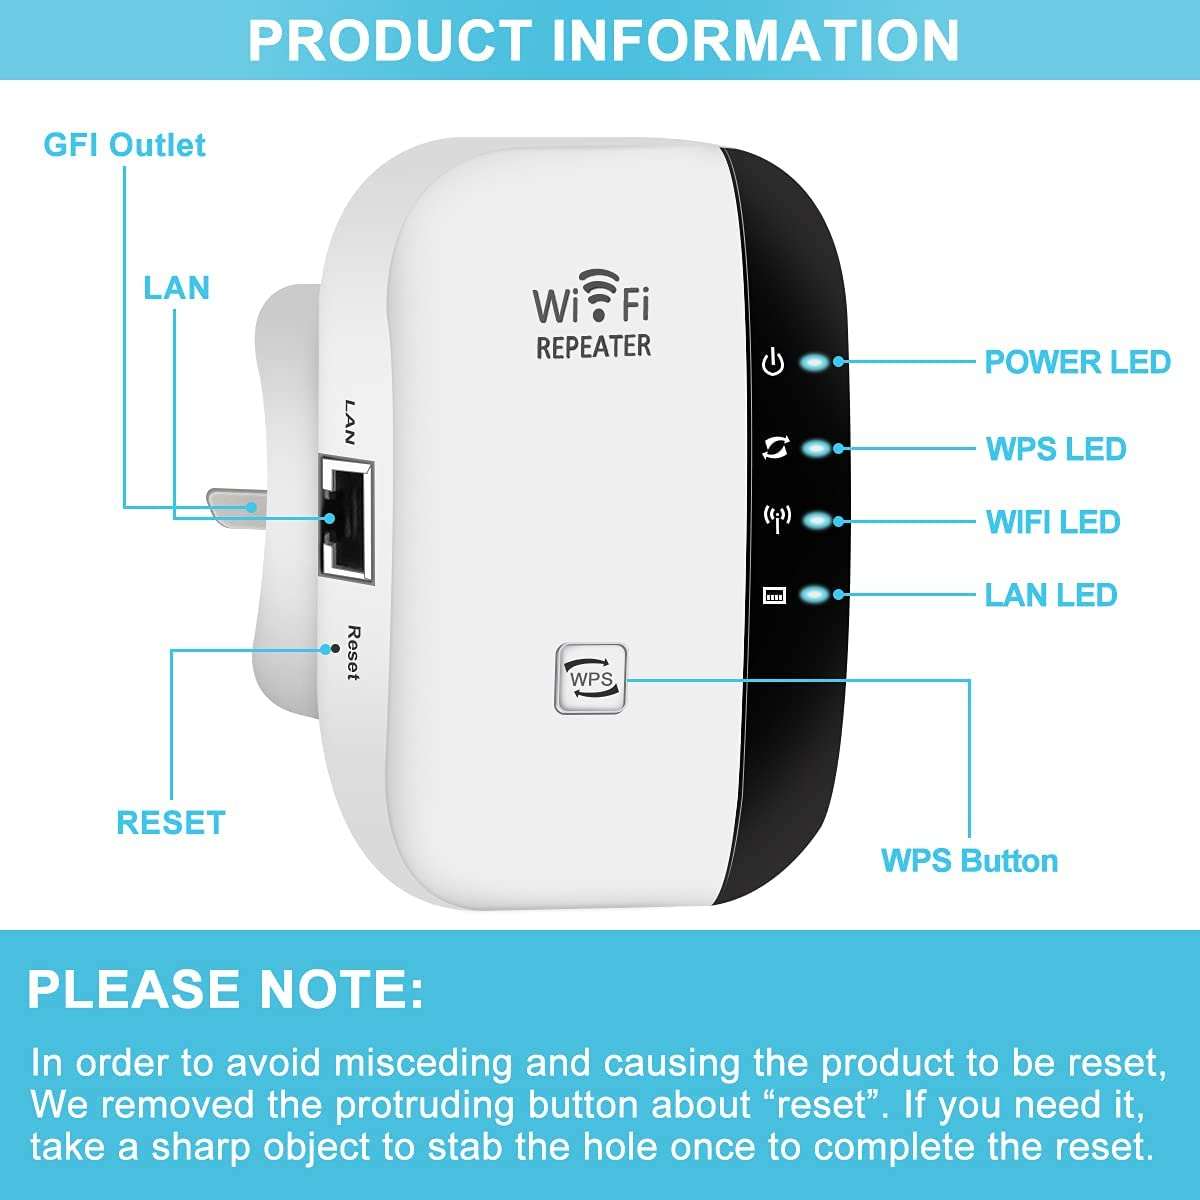 MyBrand Wifi Extender Booster for Home, Outdoor Internet - 300mbps with 2.4G Network Comes with Ethernet Lan Port Supports both AP